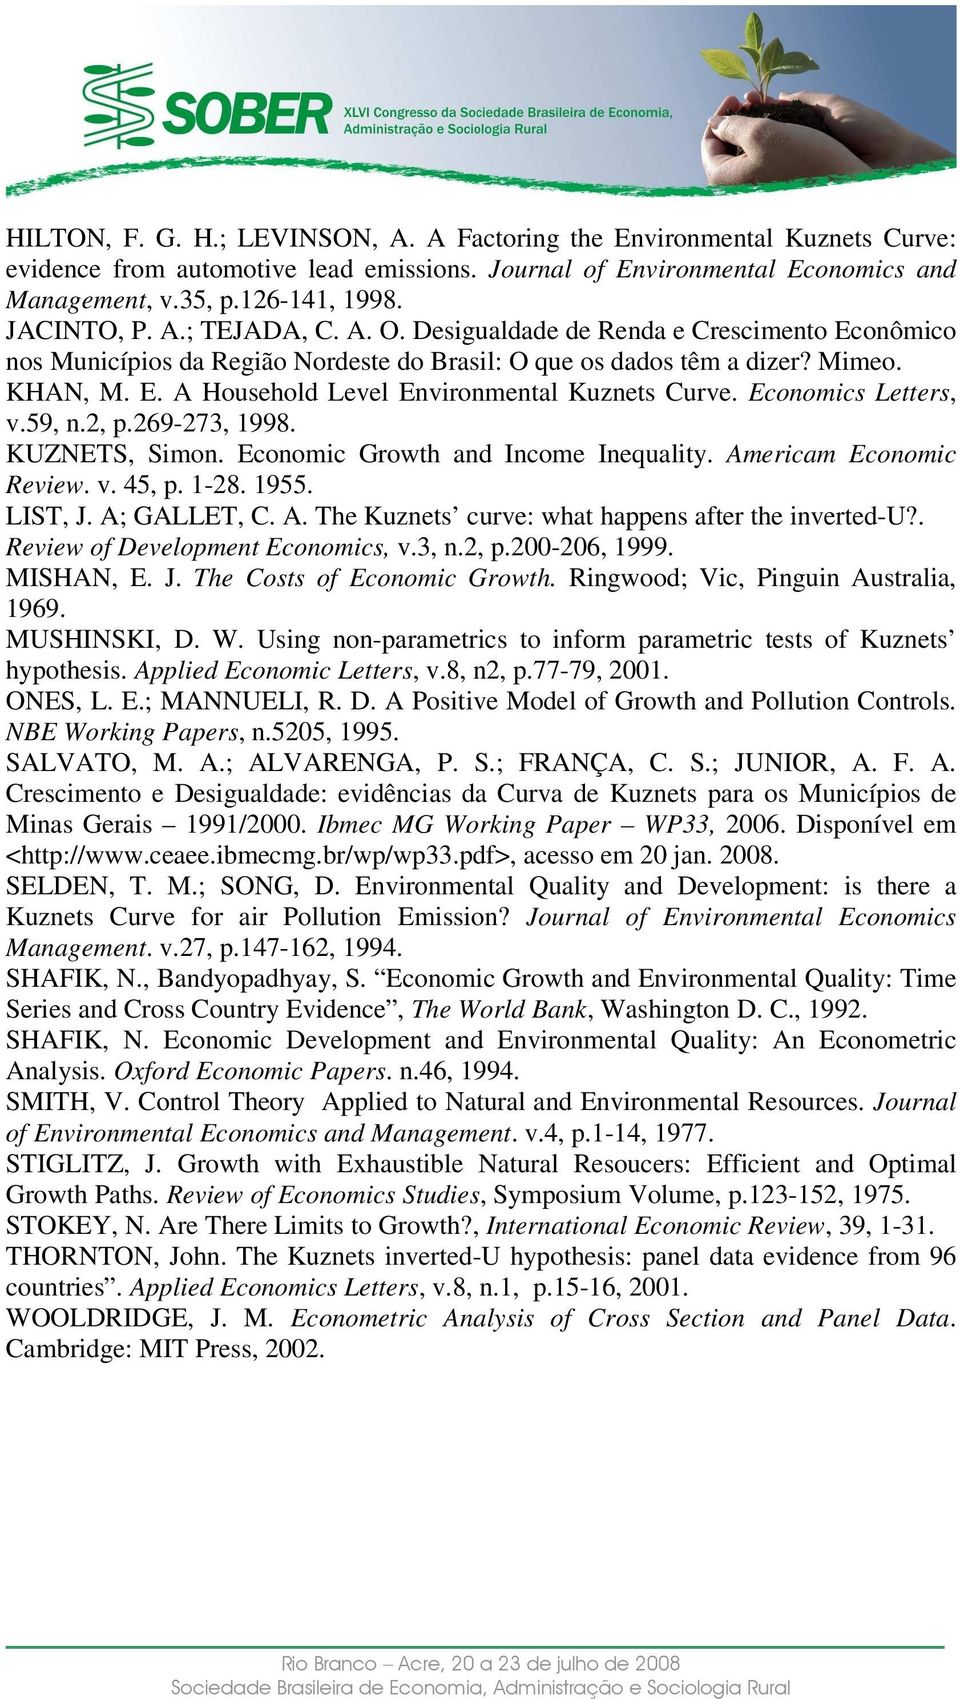 Economcs Letters, v.59, n.2, p.269-273, 1998. KUZNETS, Smon. Economc Growth and Income Inequalty. Amercam Economc Revew. v. 45, p. 1-28. 1955. LIST, J. A; GALLET, C. A. The Kuznets curve: what happens after the nverted-u?